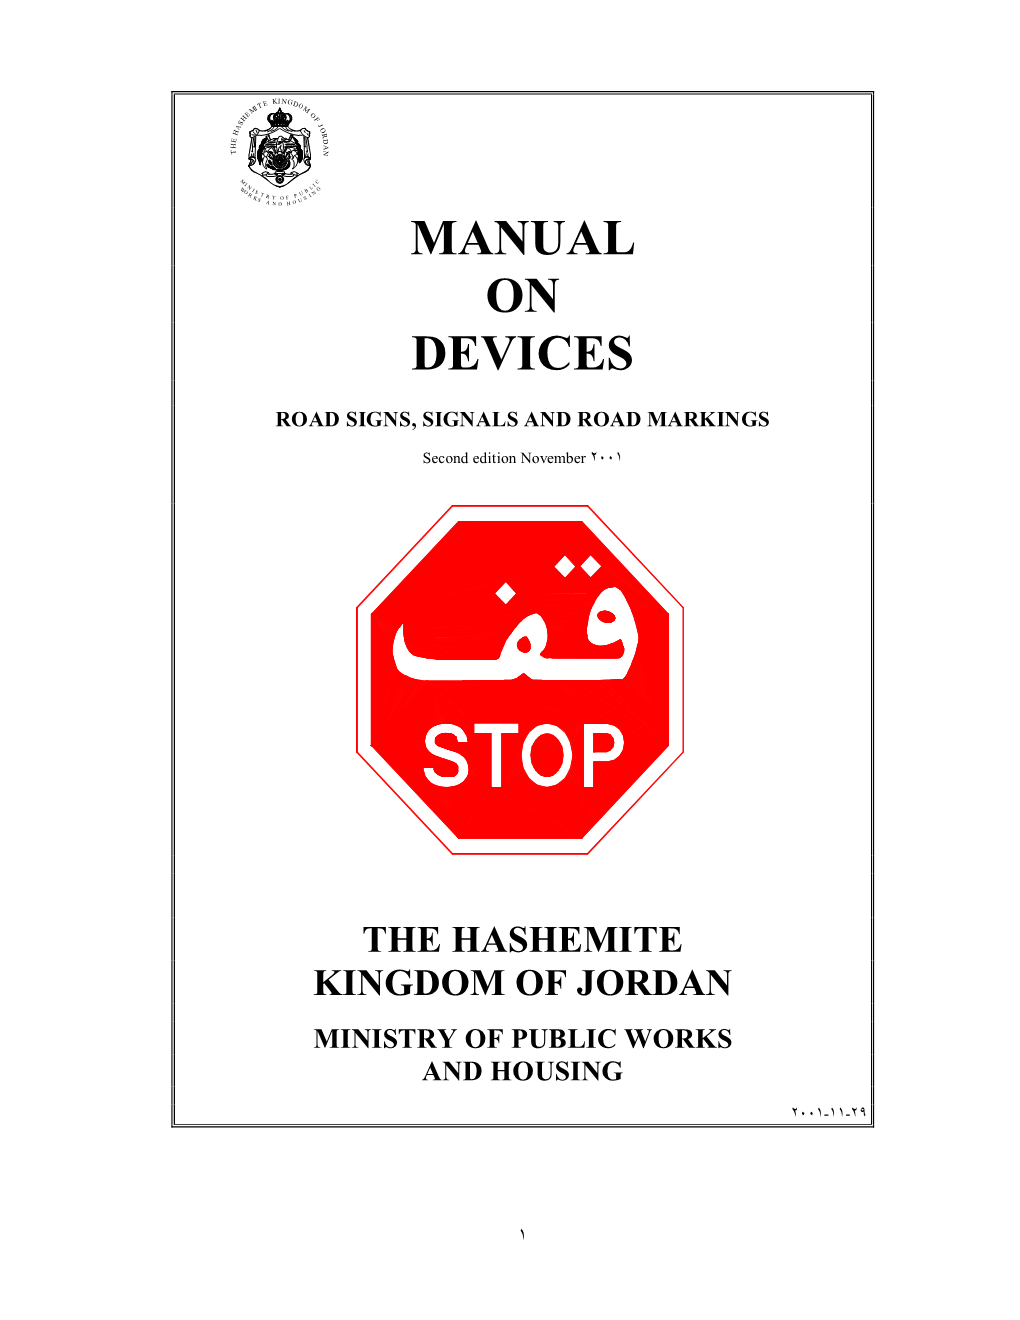 App 5 Manual on Traffic Control Devices